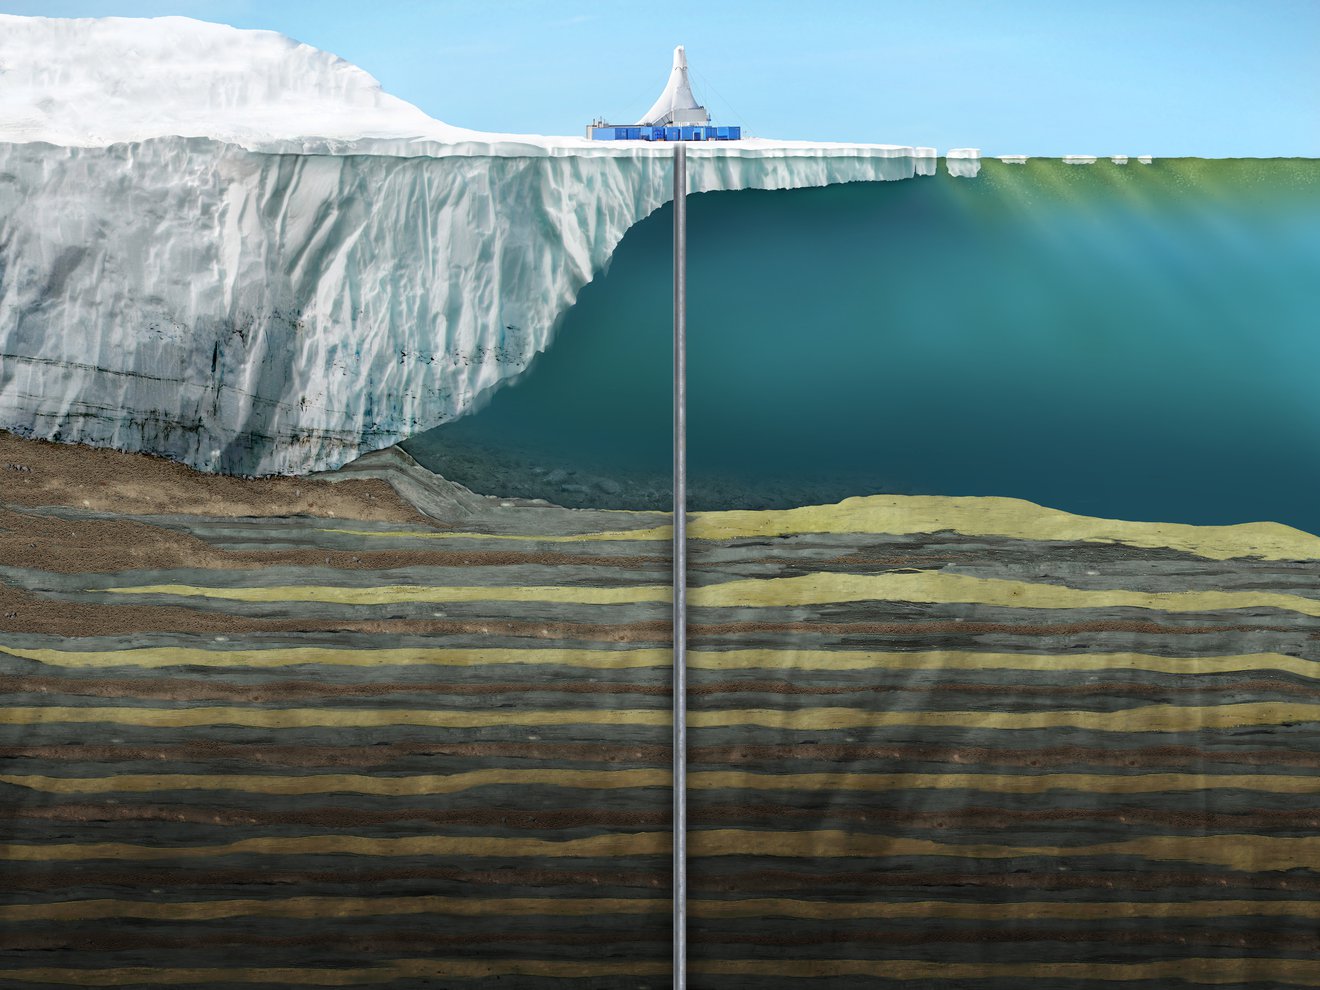 An illustration of sediment core drilling in the Antarctic for a NASA study into ancient climate change.